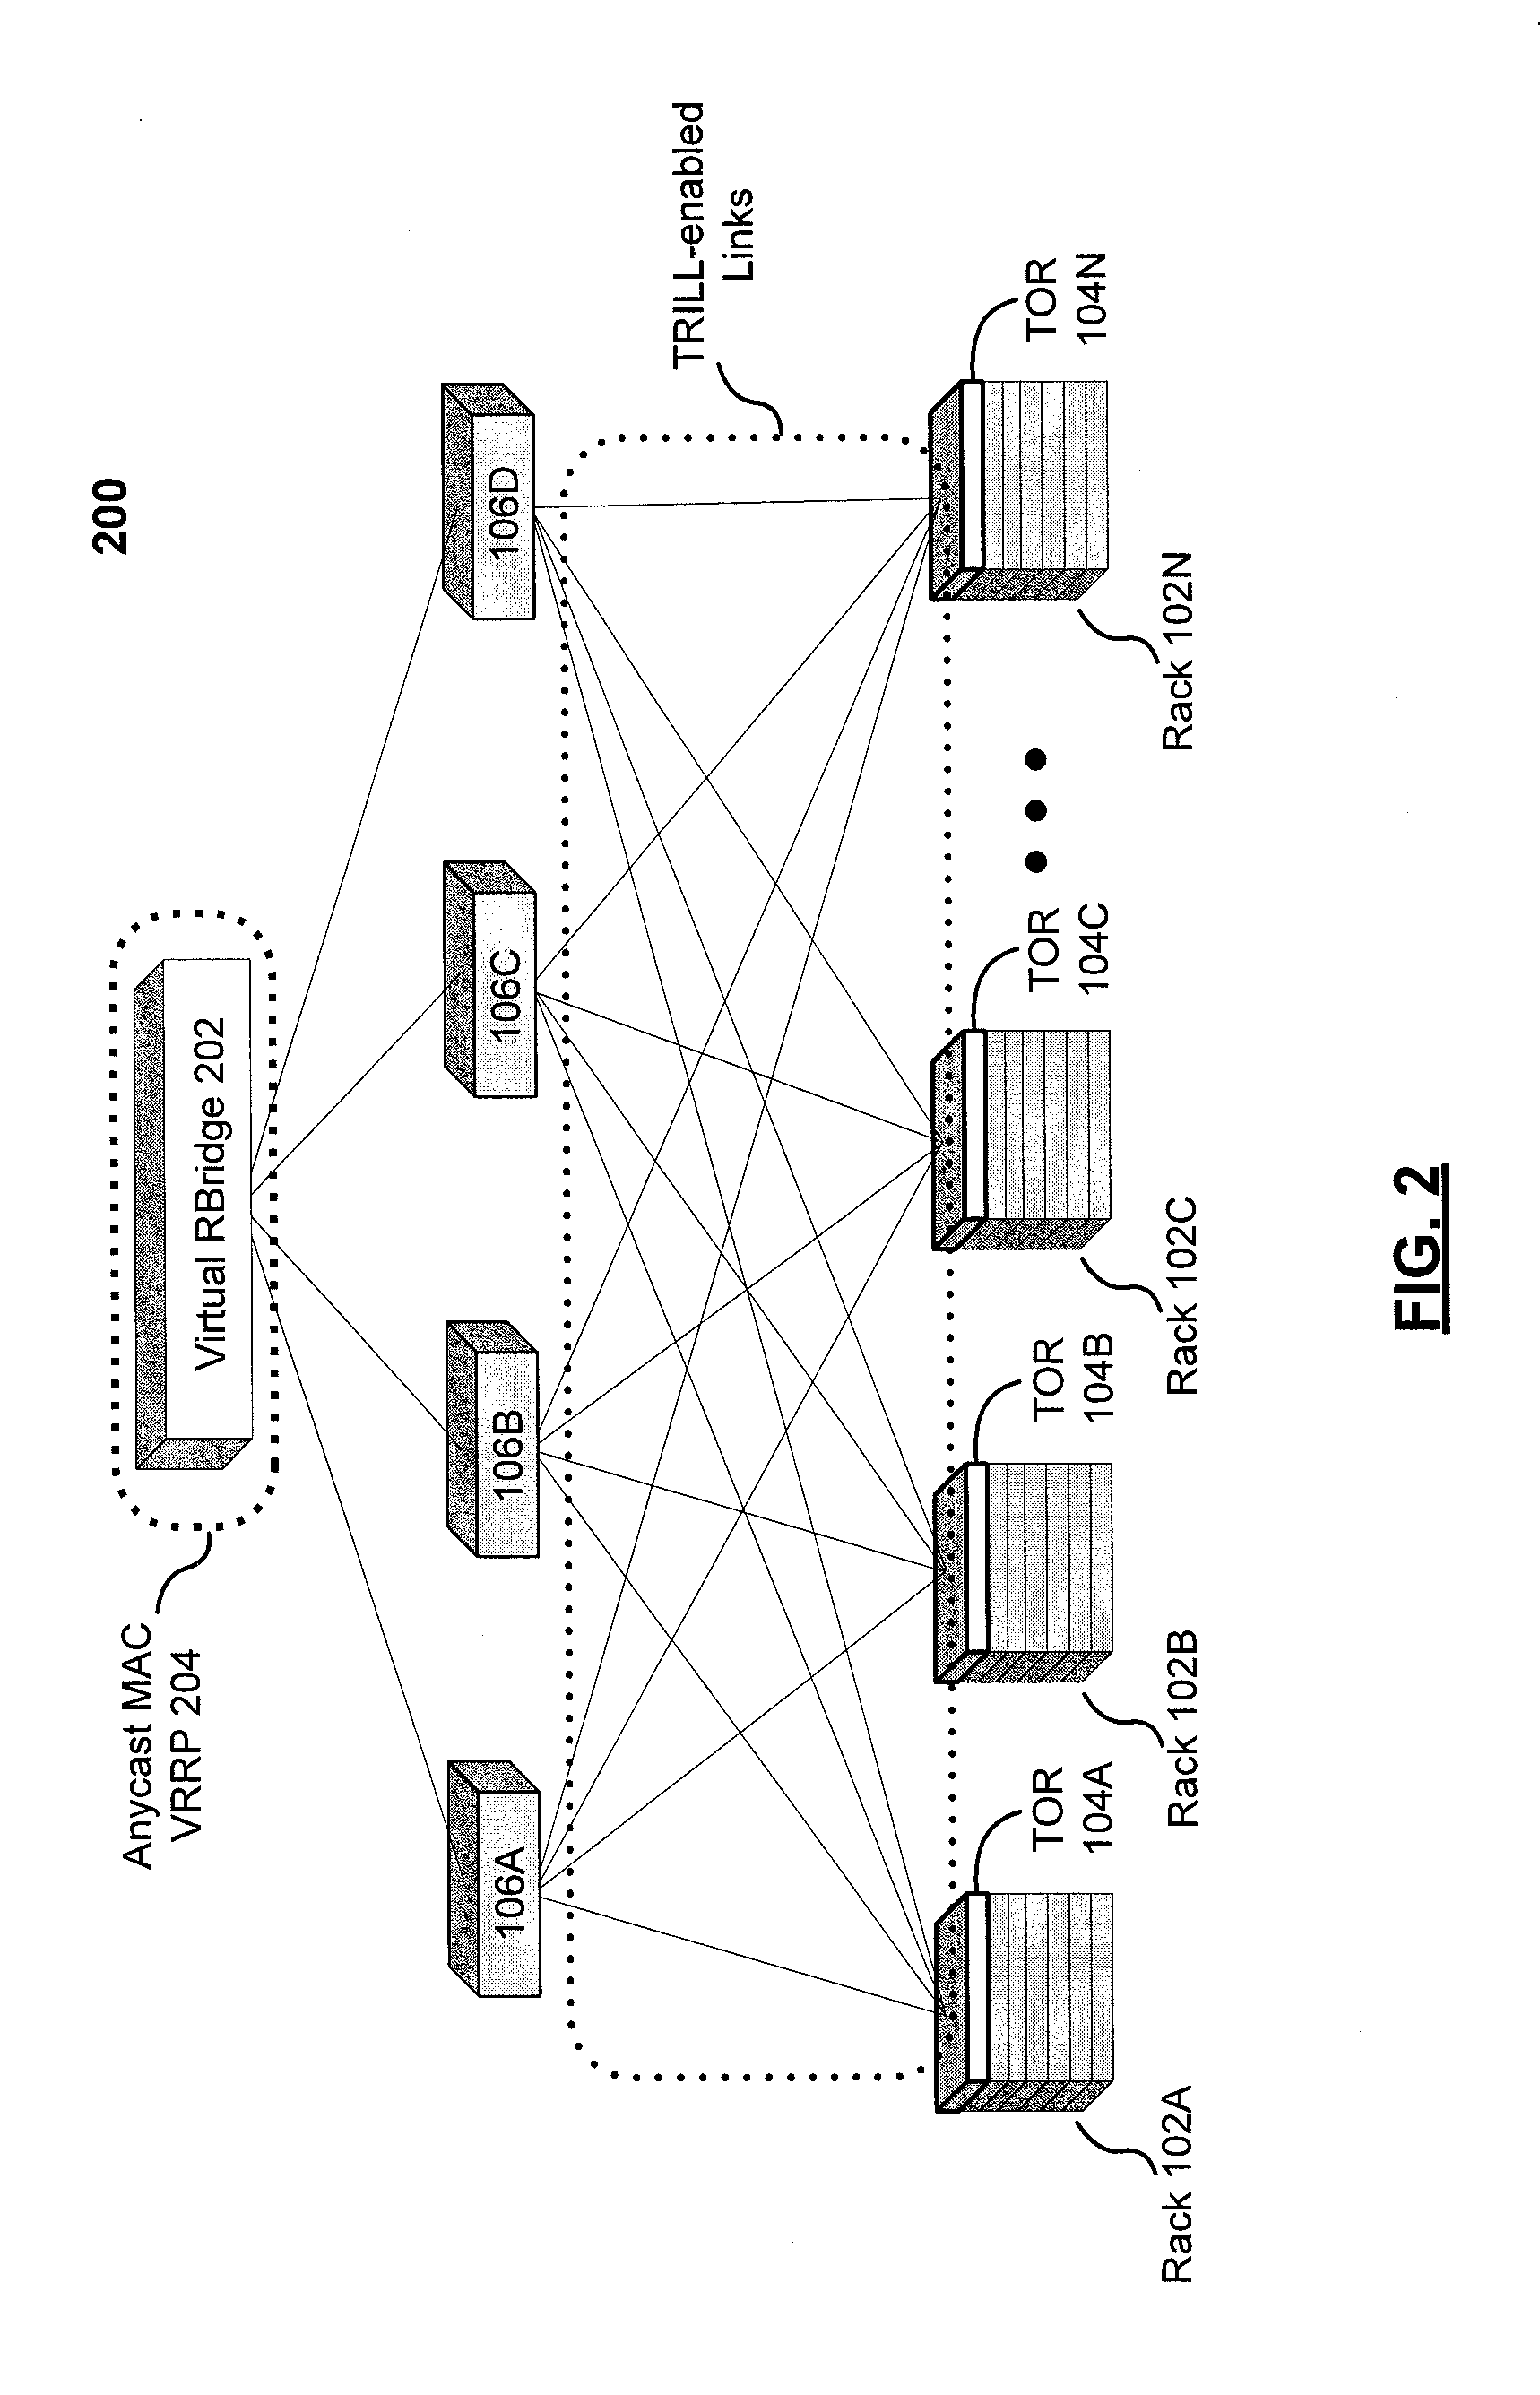 Systems and methods for optimizing layer three routing in an information handling system